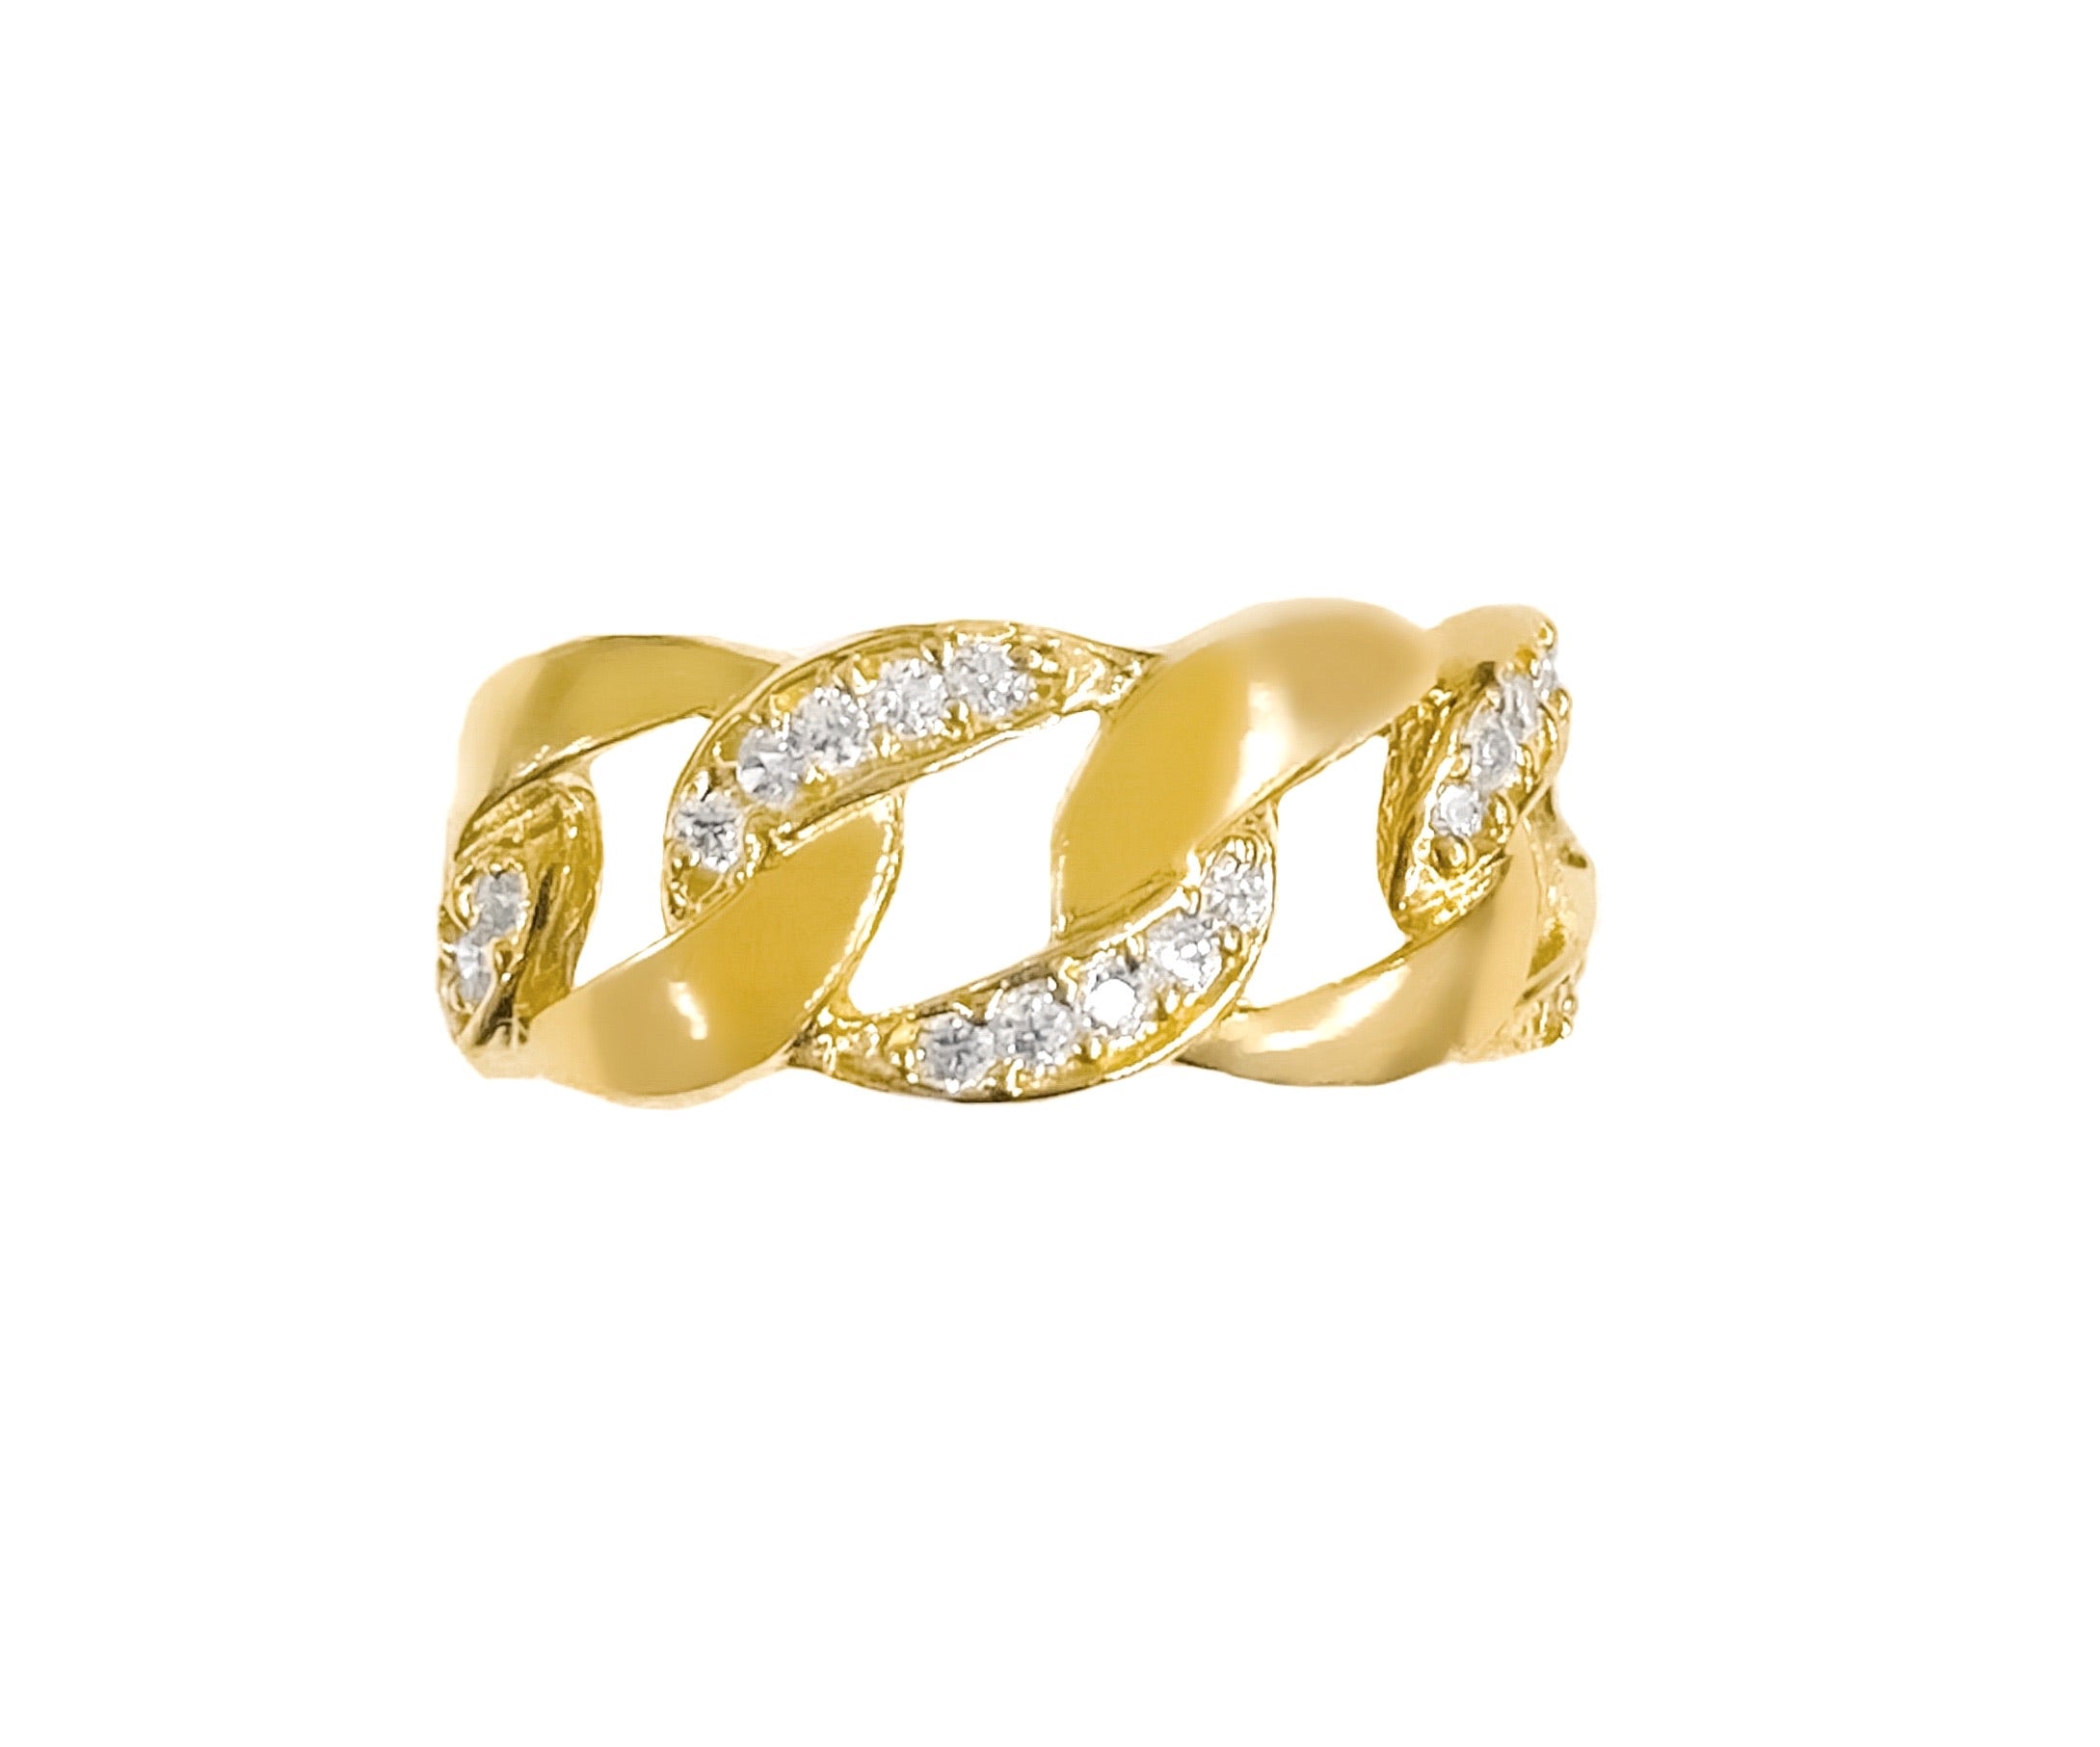 14K YELLOW GOLD PAVE CUBAN LINK RING